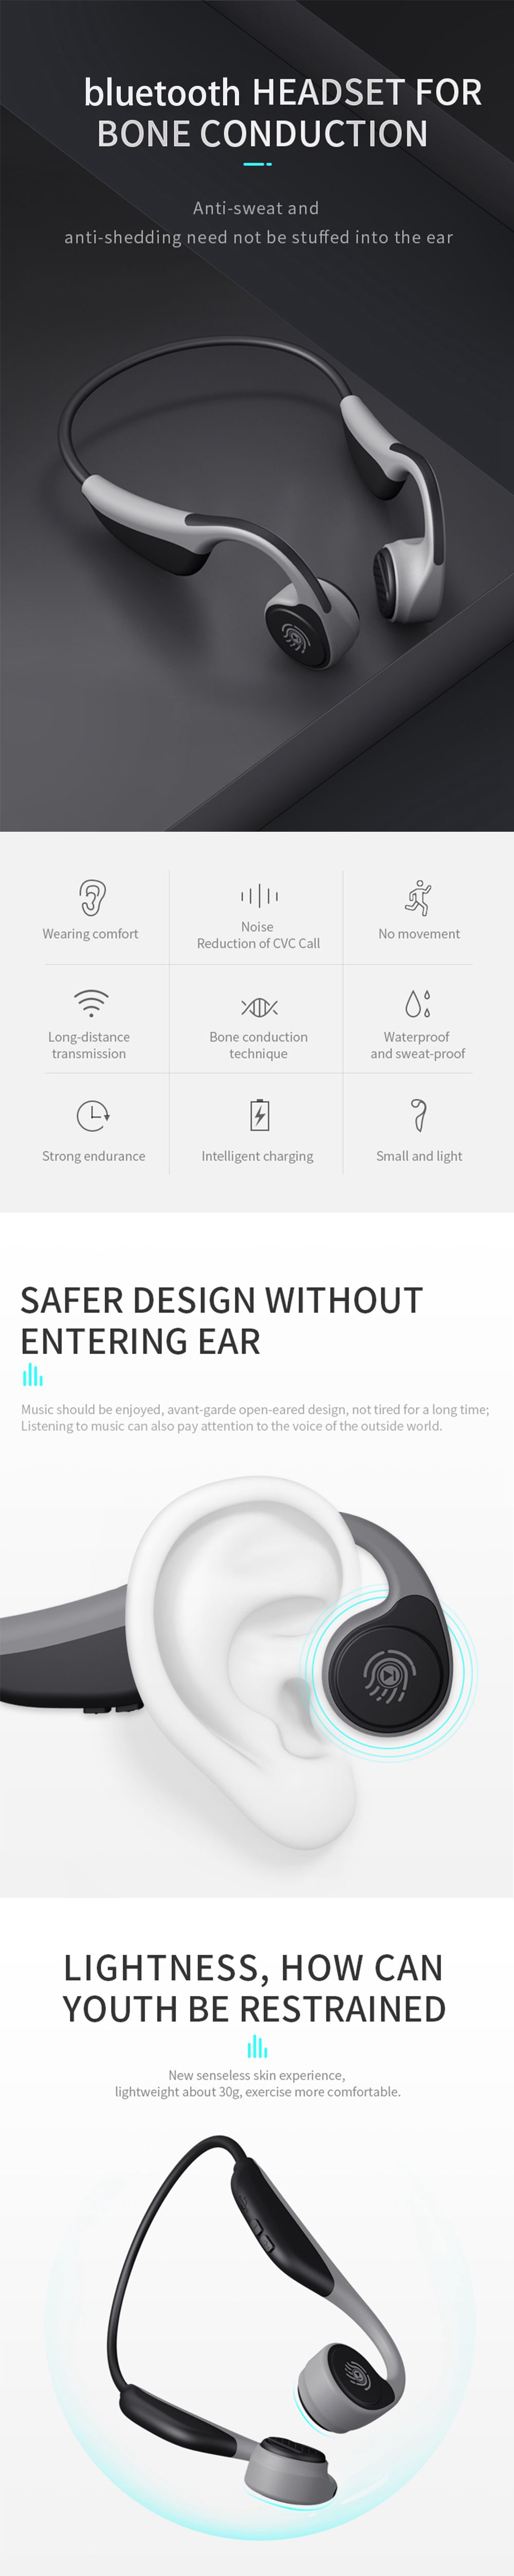 VCF-V9-bluetooth-50-Waterproof-Stereo-Earphone-Sports-Earphone-over-the-Ear-Headphones-for-iOS-Andro-1586642